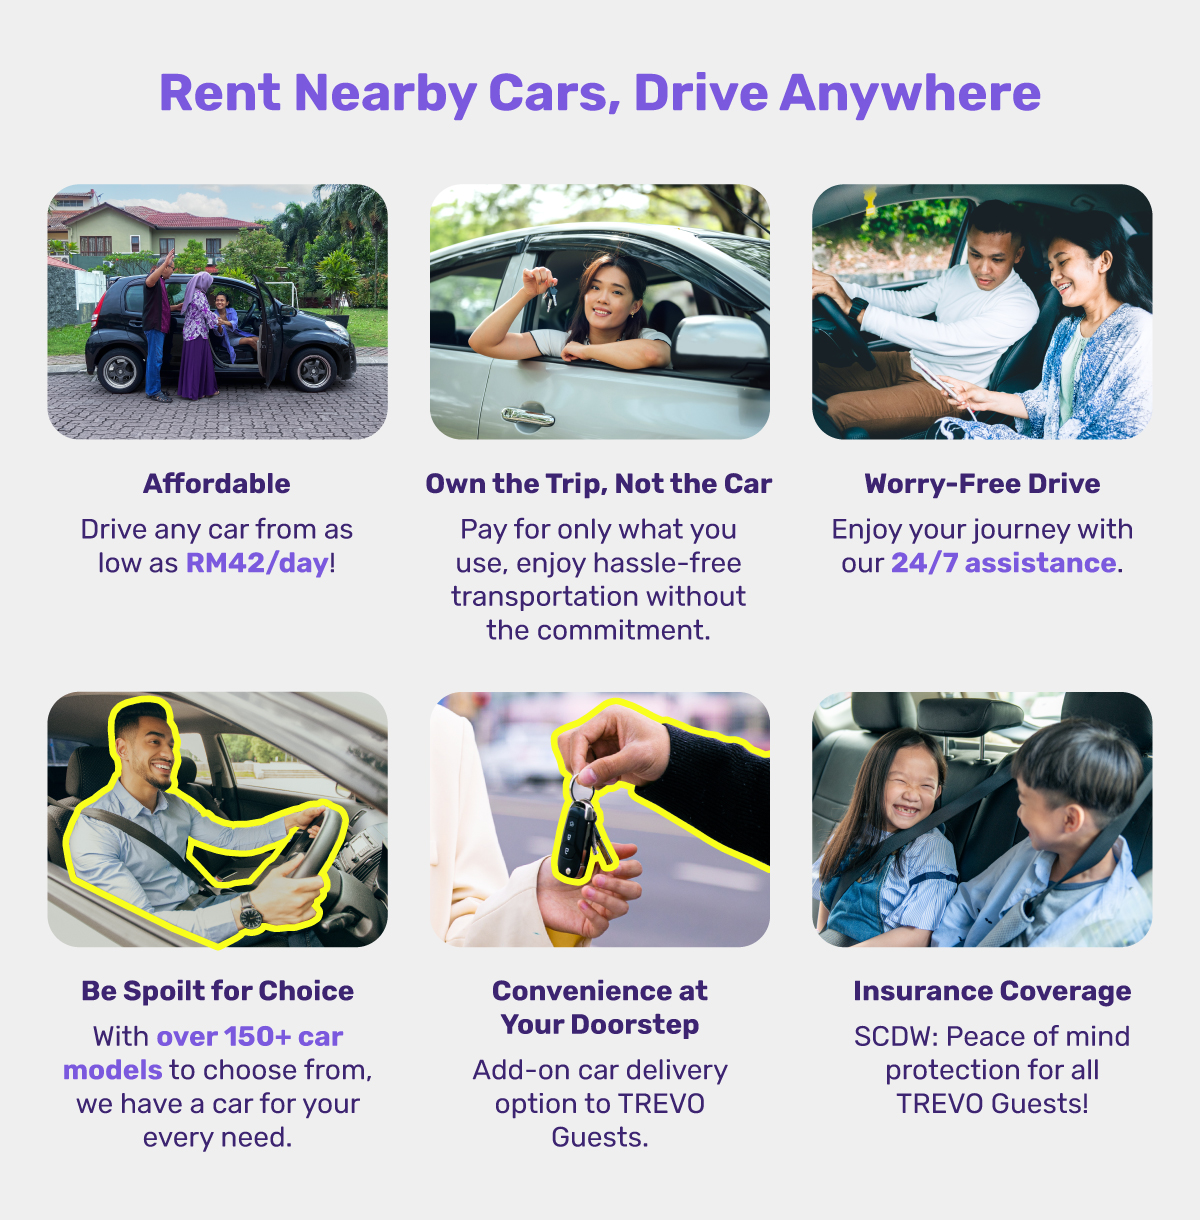 Rent Nearby Cars, Drive Anywhere